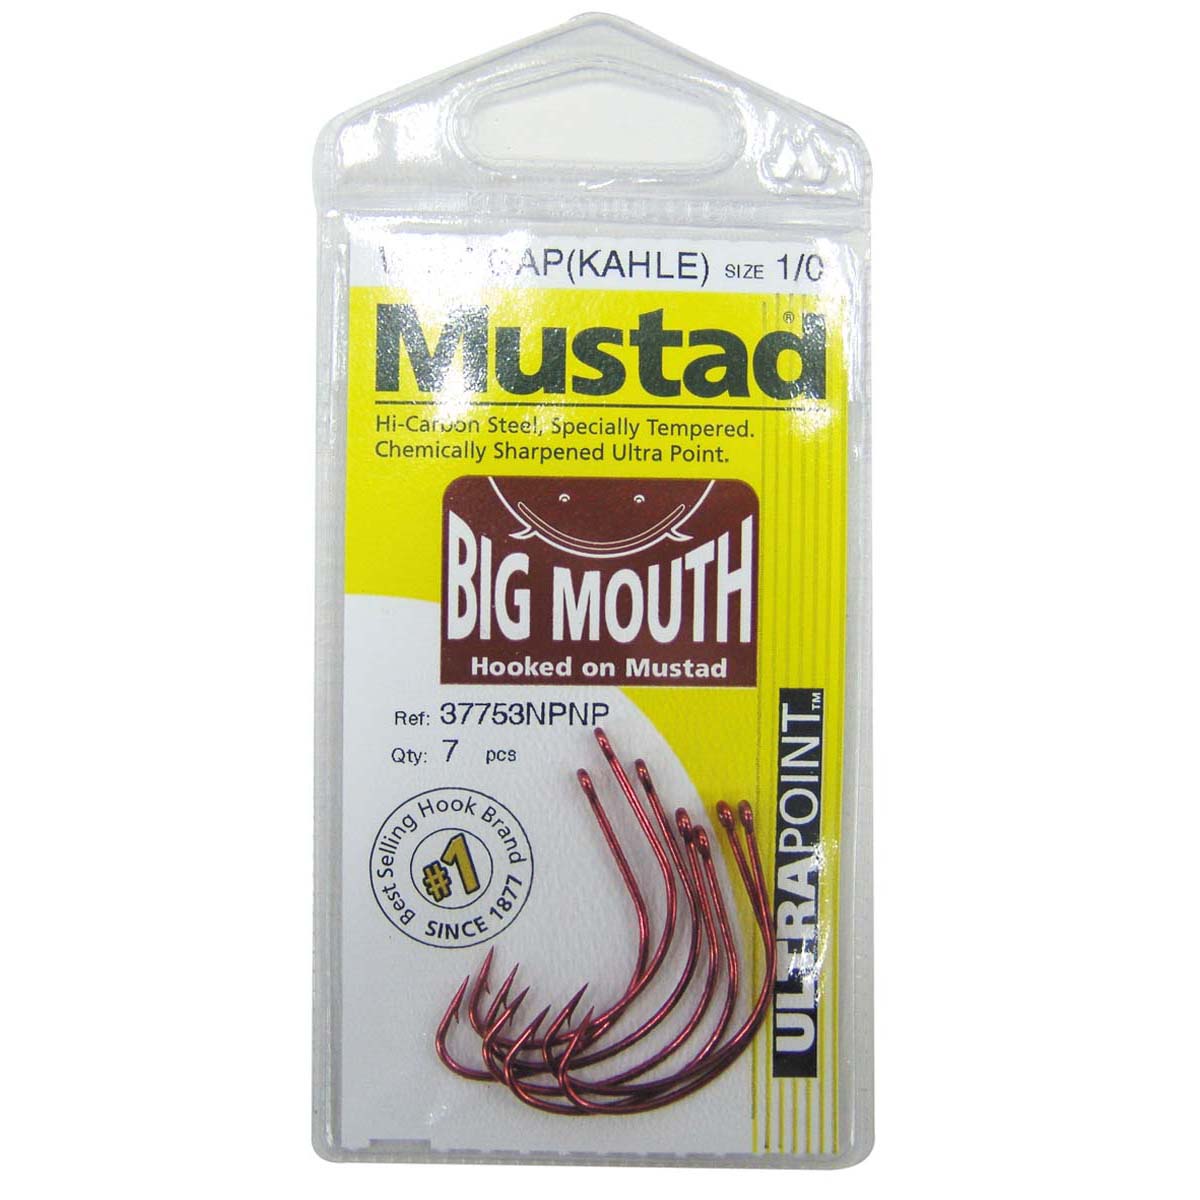 Mustad Big Mouth Hooks 1 / 0 7 Pack